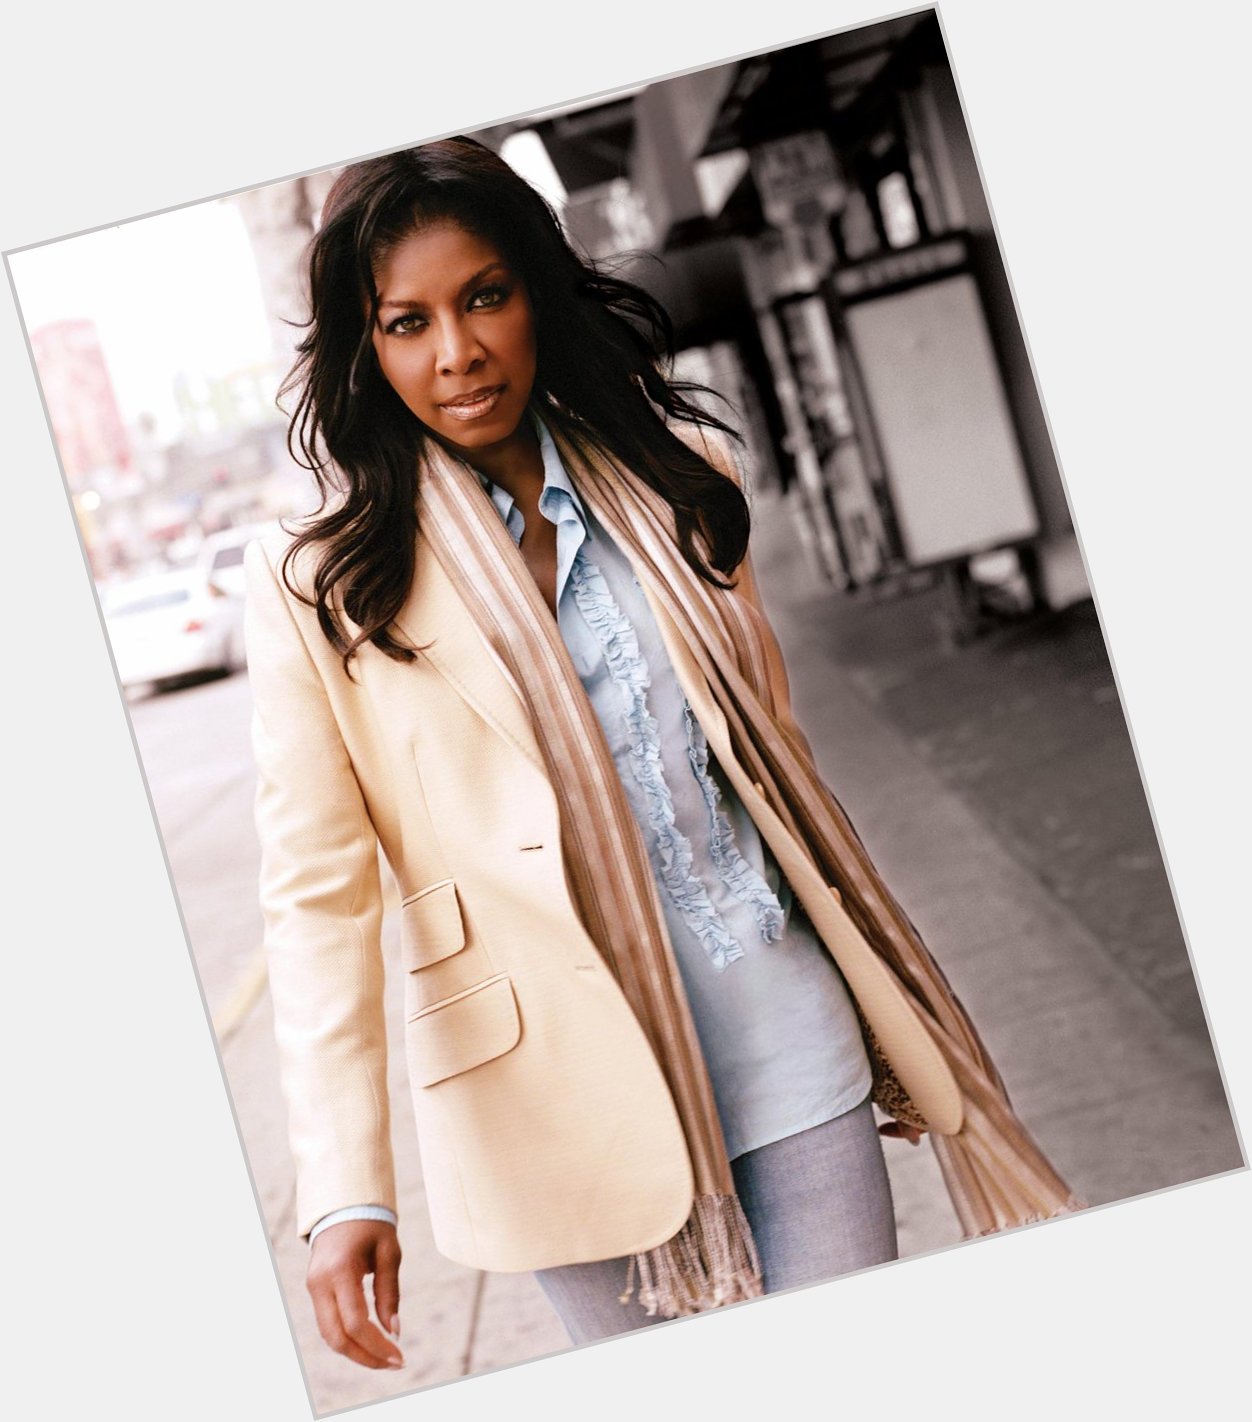 Happy Birthday to Natalie Cole, who turns 65 today! 